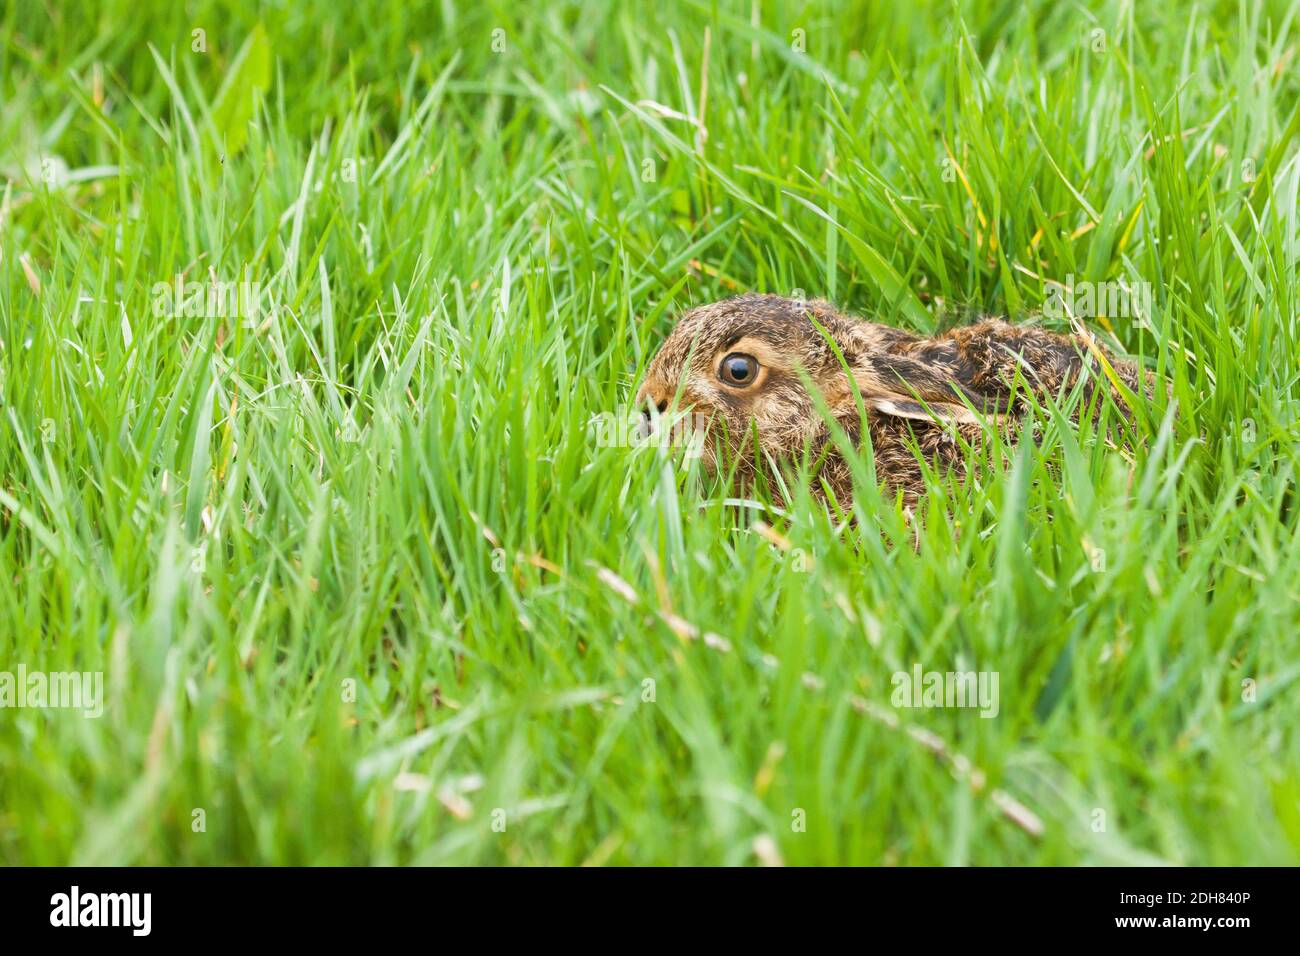 European hare, Brown hare (Lepus europaeus), little hare on grass, side view, Netherlands Stock Photo